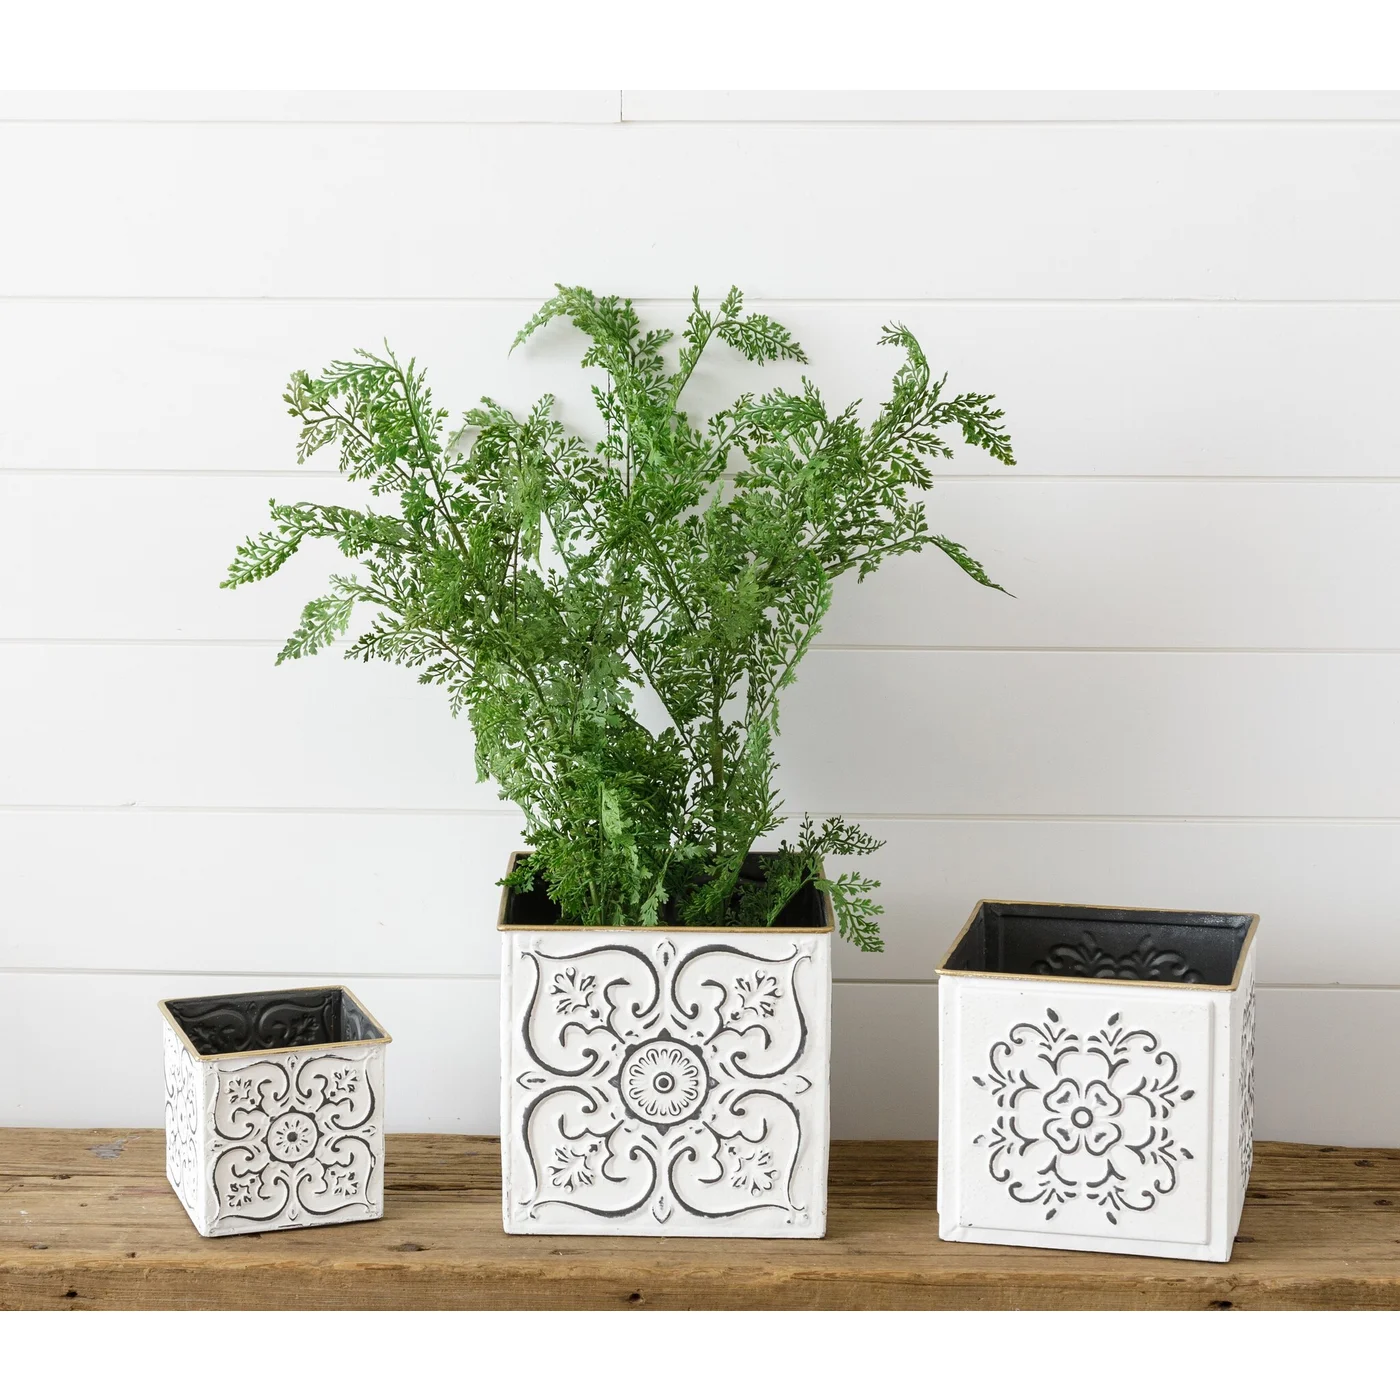 Set of 3 Cottage Distressed White Medallion Tile Containers